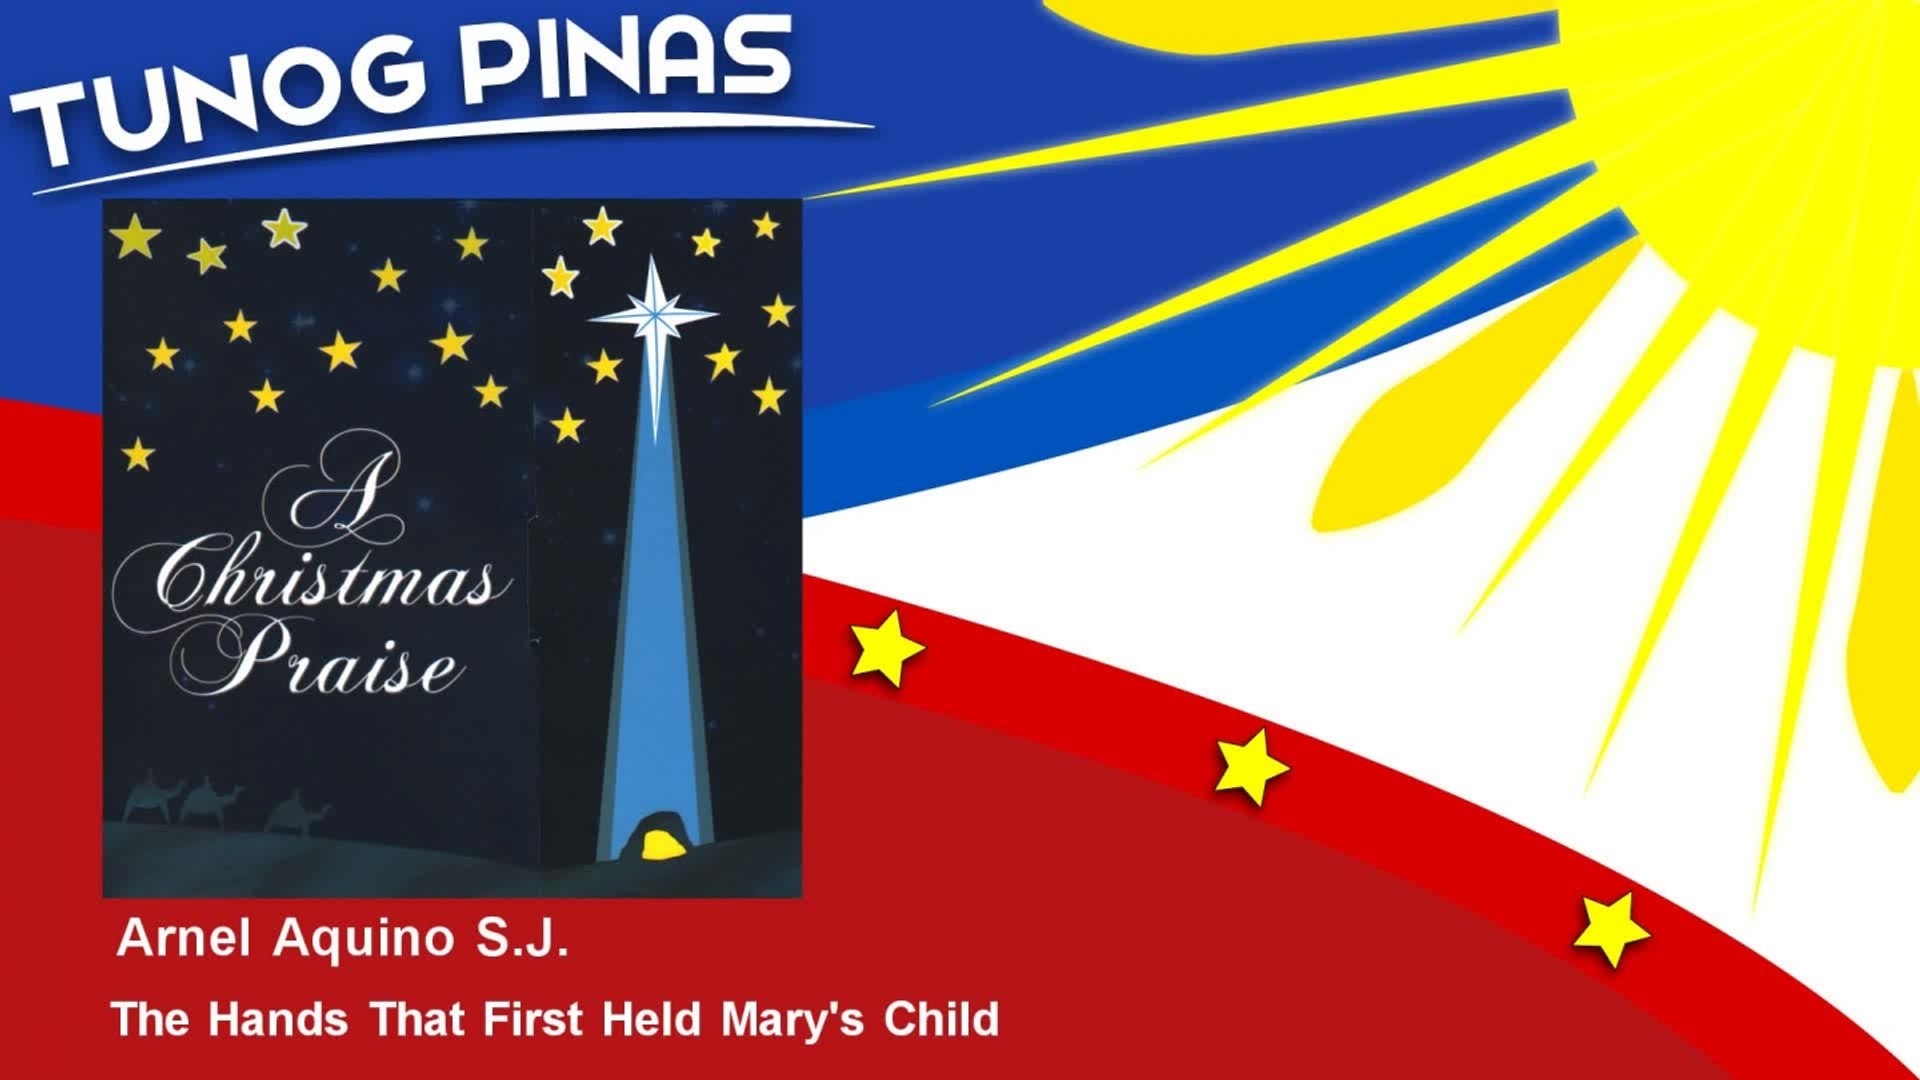 Arnel Aquino S.J. - The Hands That First Held Mary's Child